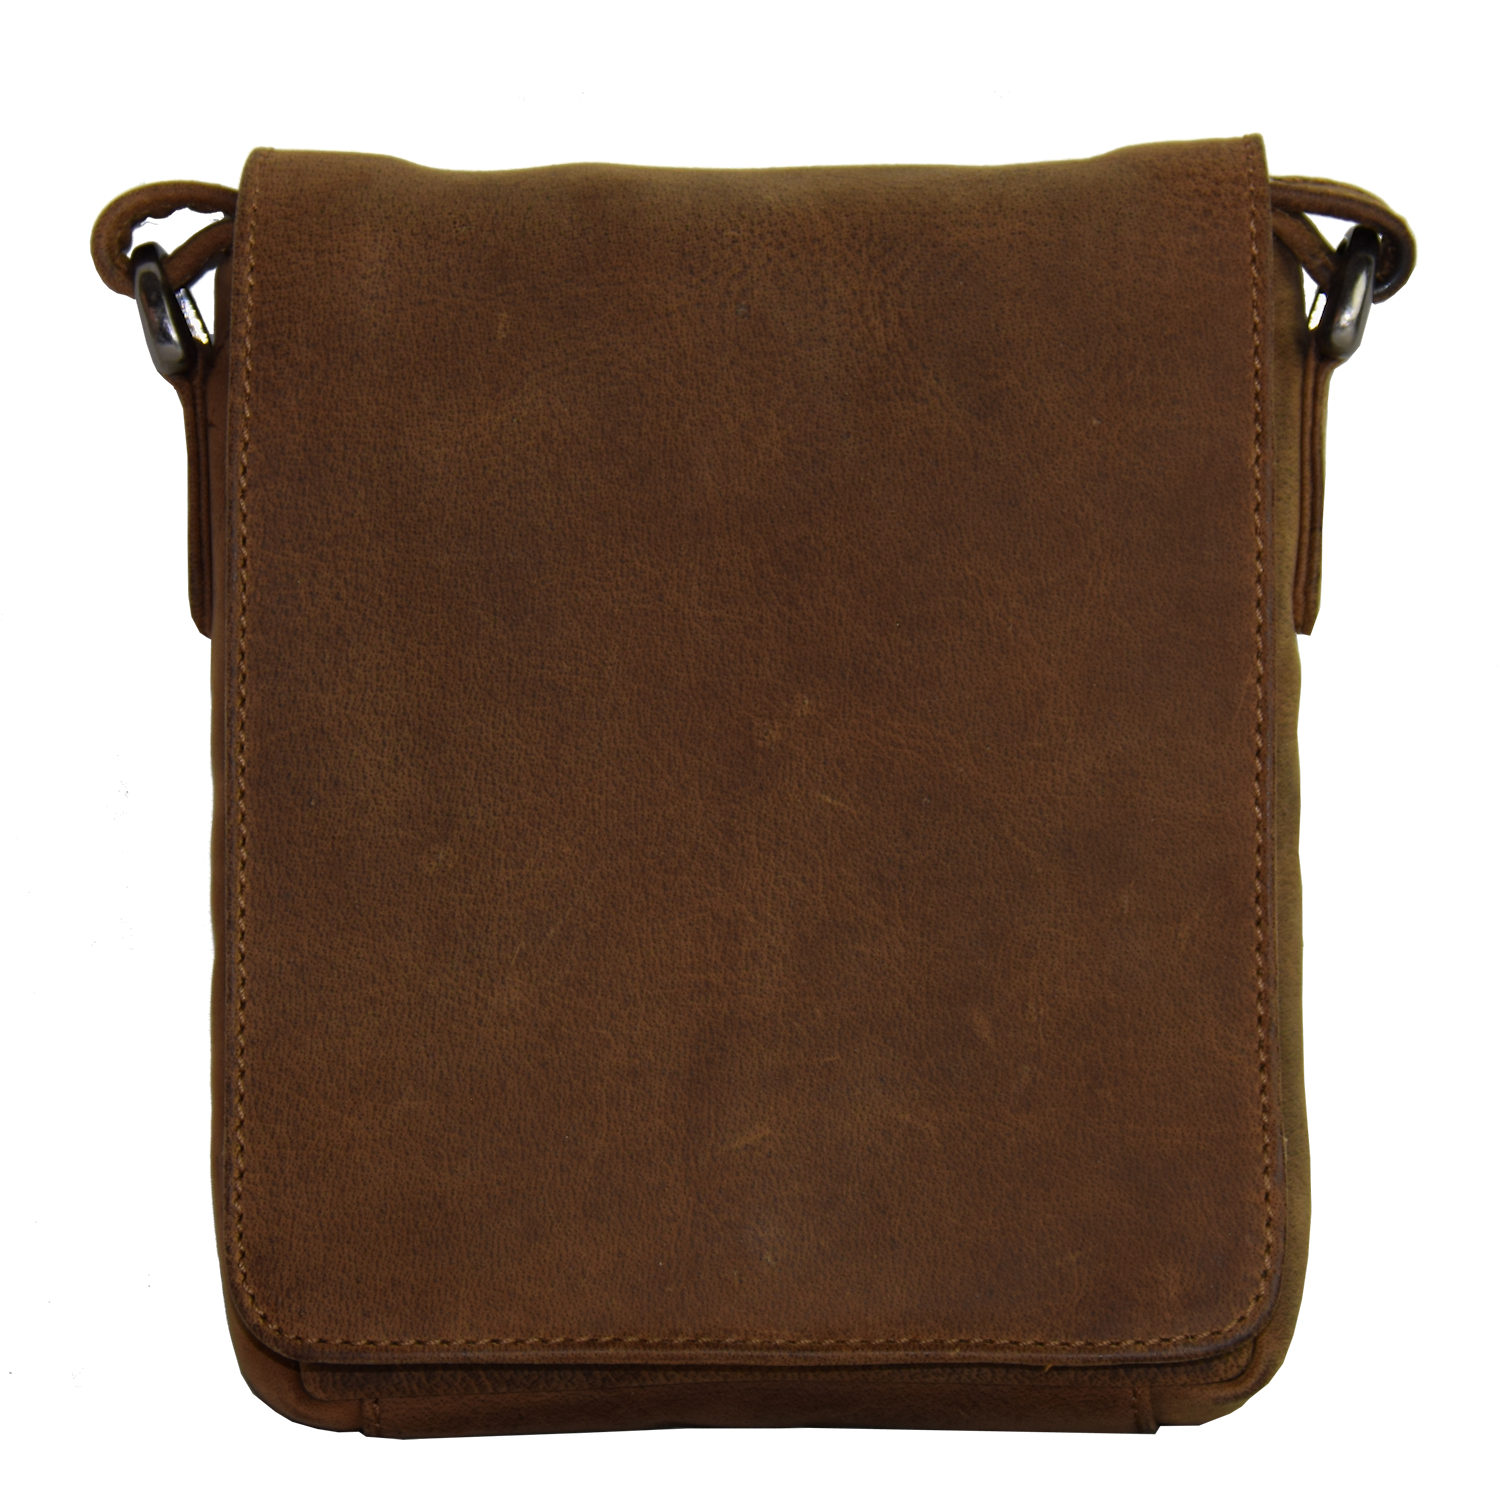 The Canada Leathers Collection - Crossbody style Adrian Klis 2845